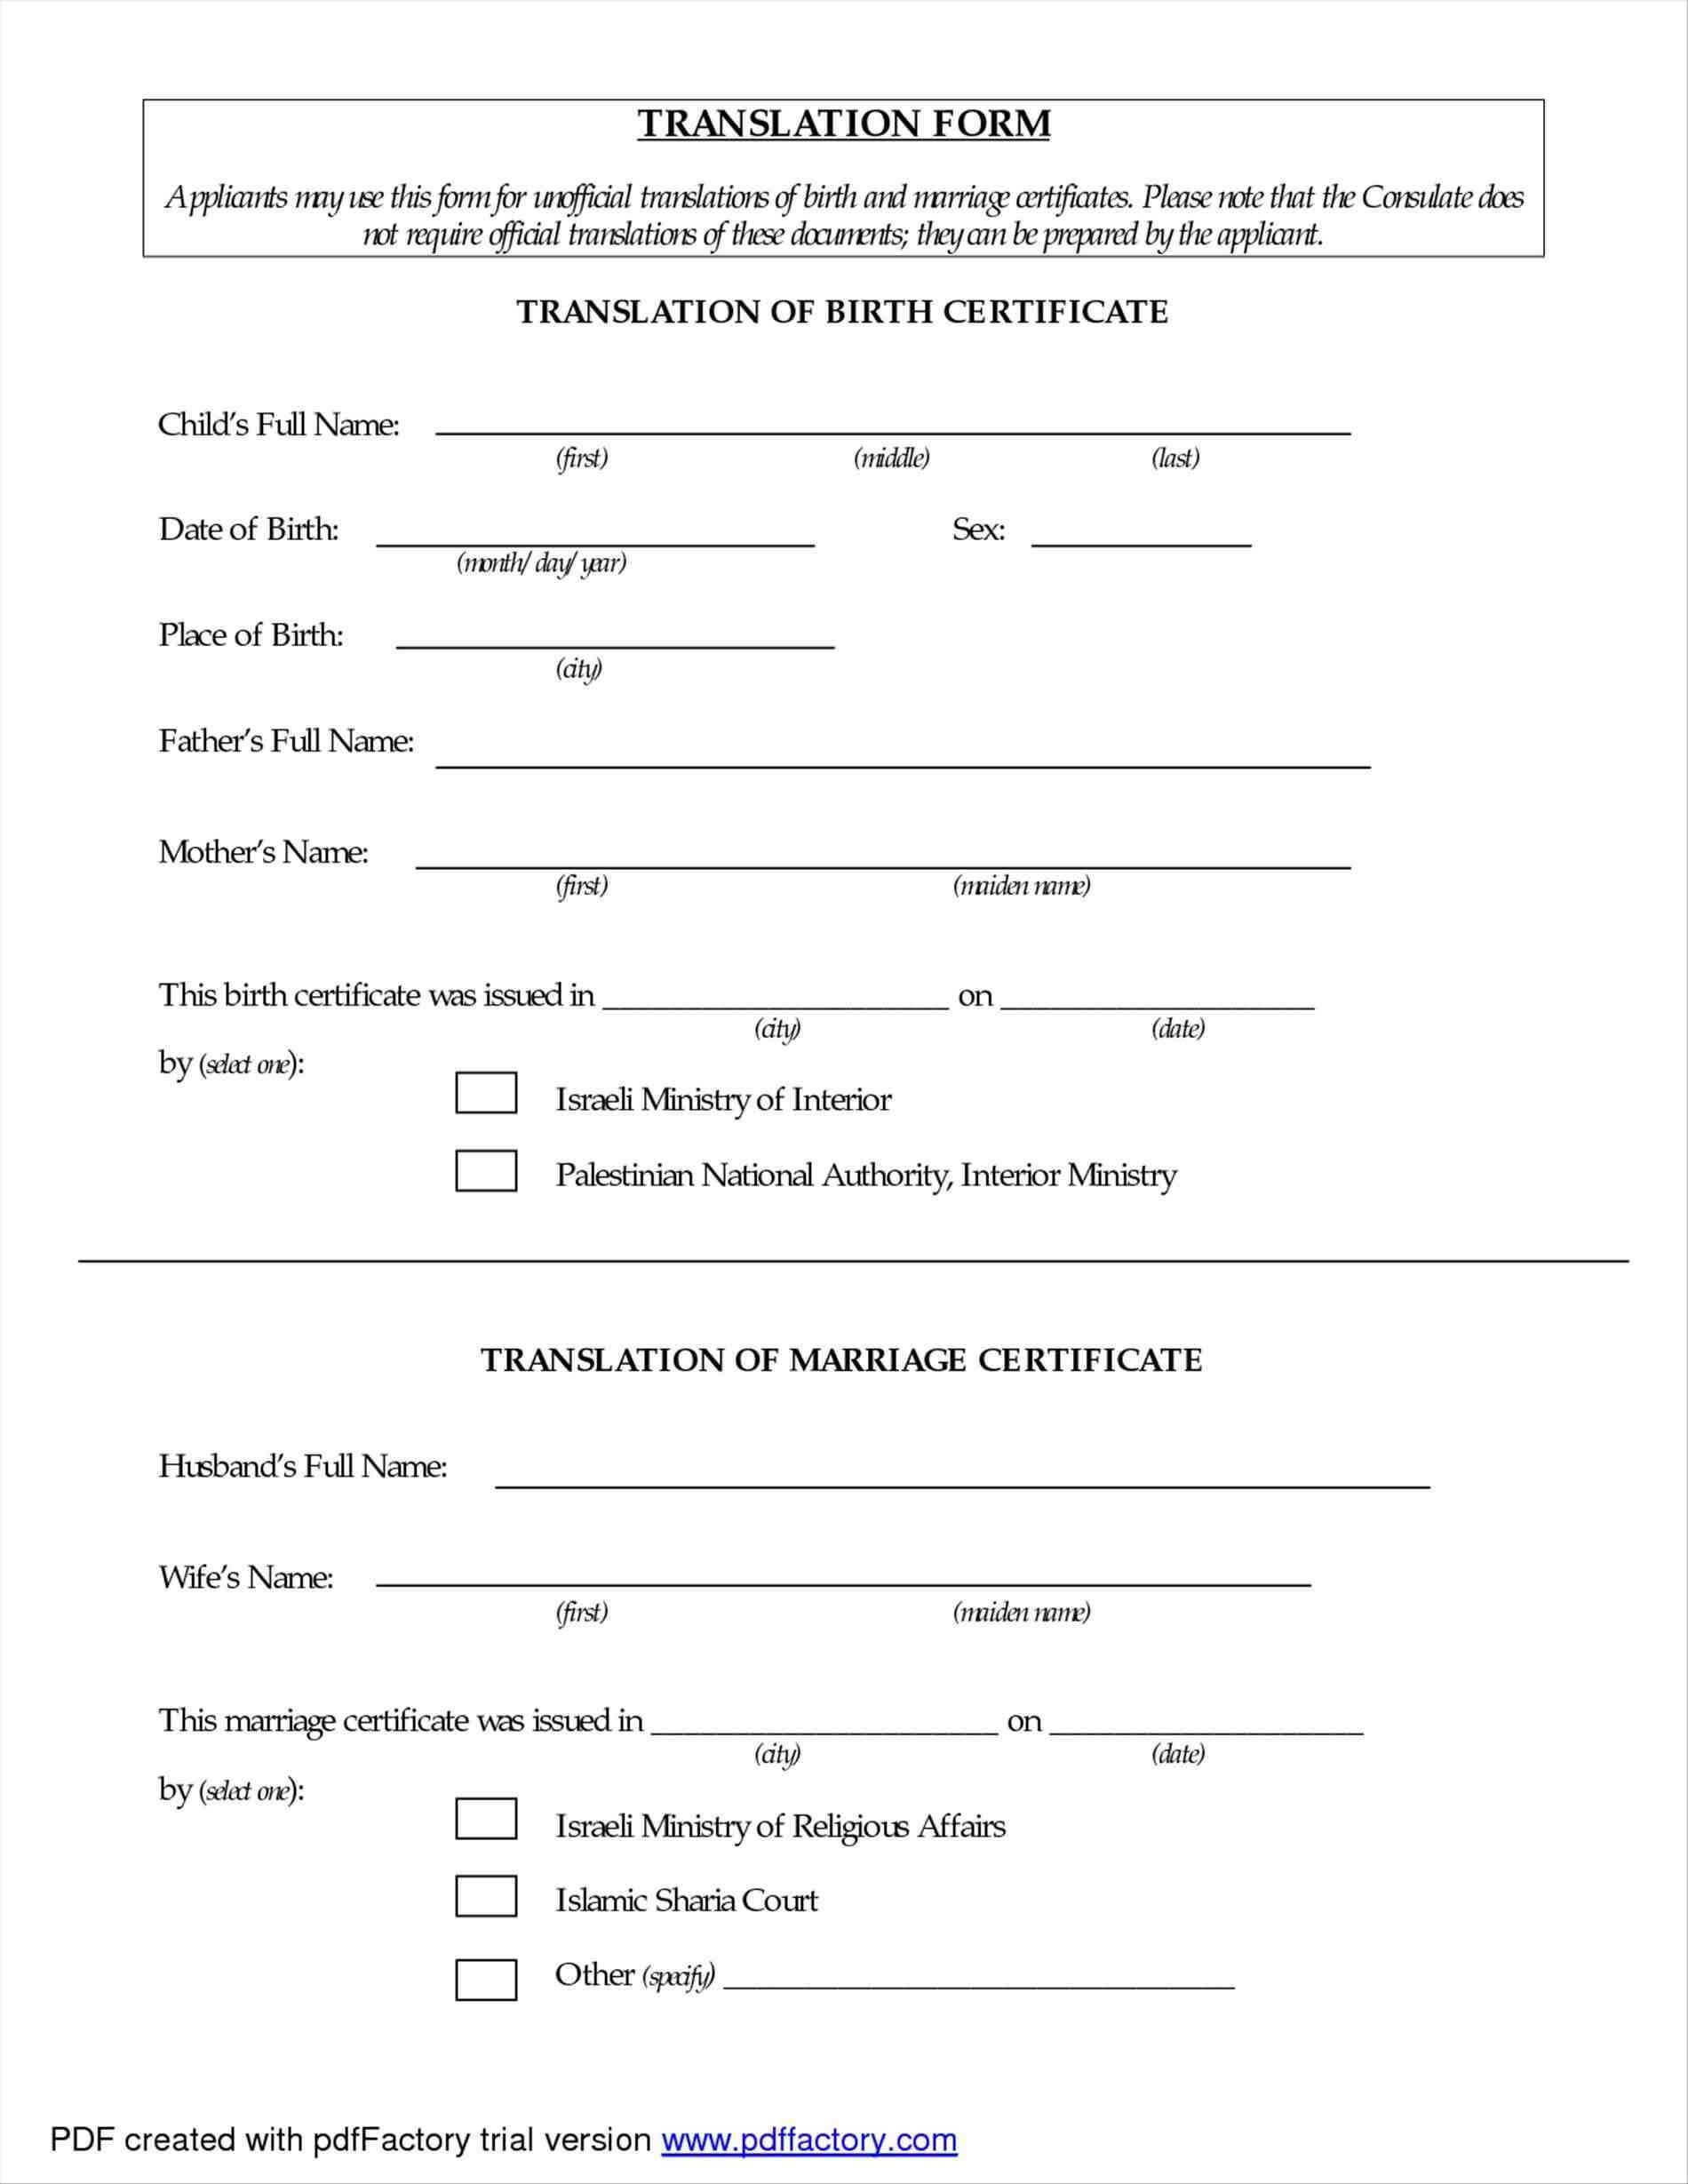 Translate Marriage Certificate From Spanish To English Regarding Marriage Certificate Translation Template